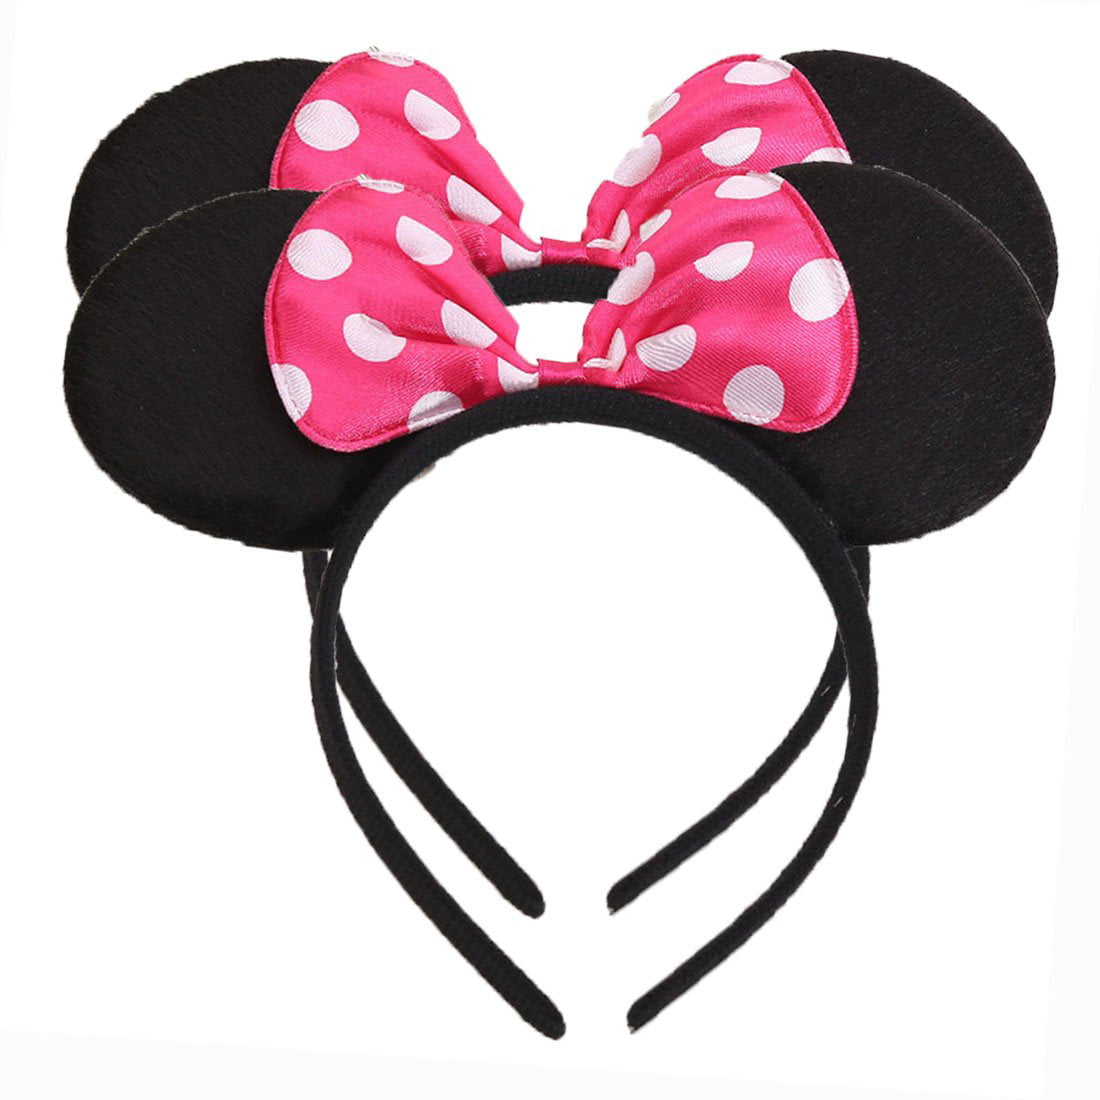 Black & Red Mouse Ears Headband EUICAE Adult Headband Mouse Costume Solid Back Red Pink Bow for Girls Boys Birthday Party Theme Park Costume Play Celebration Pack of 12